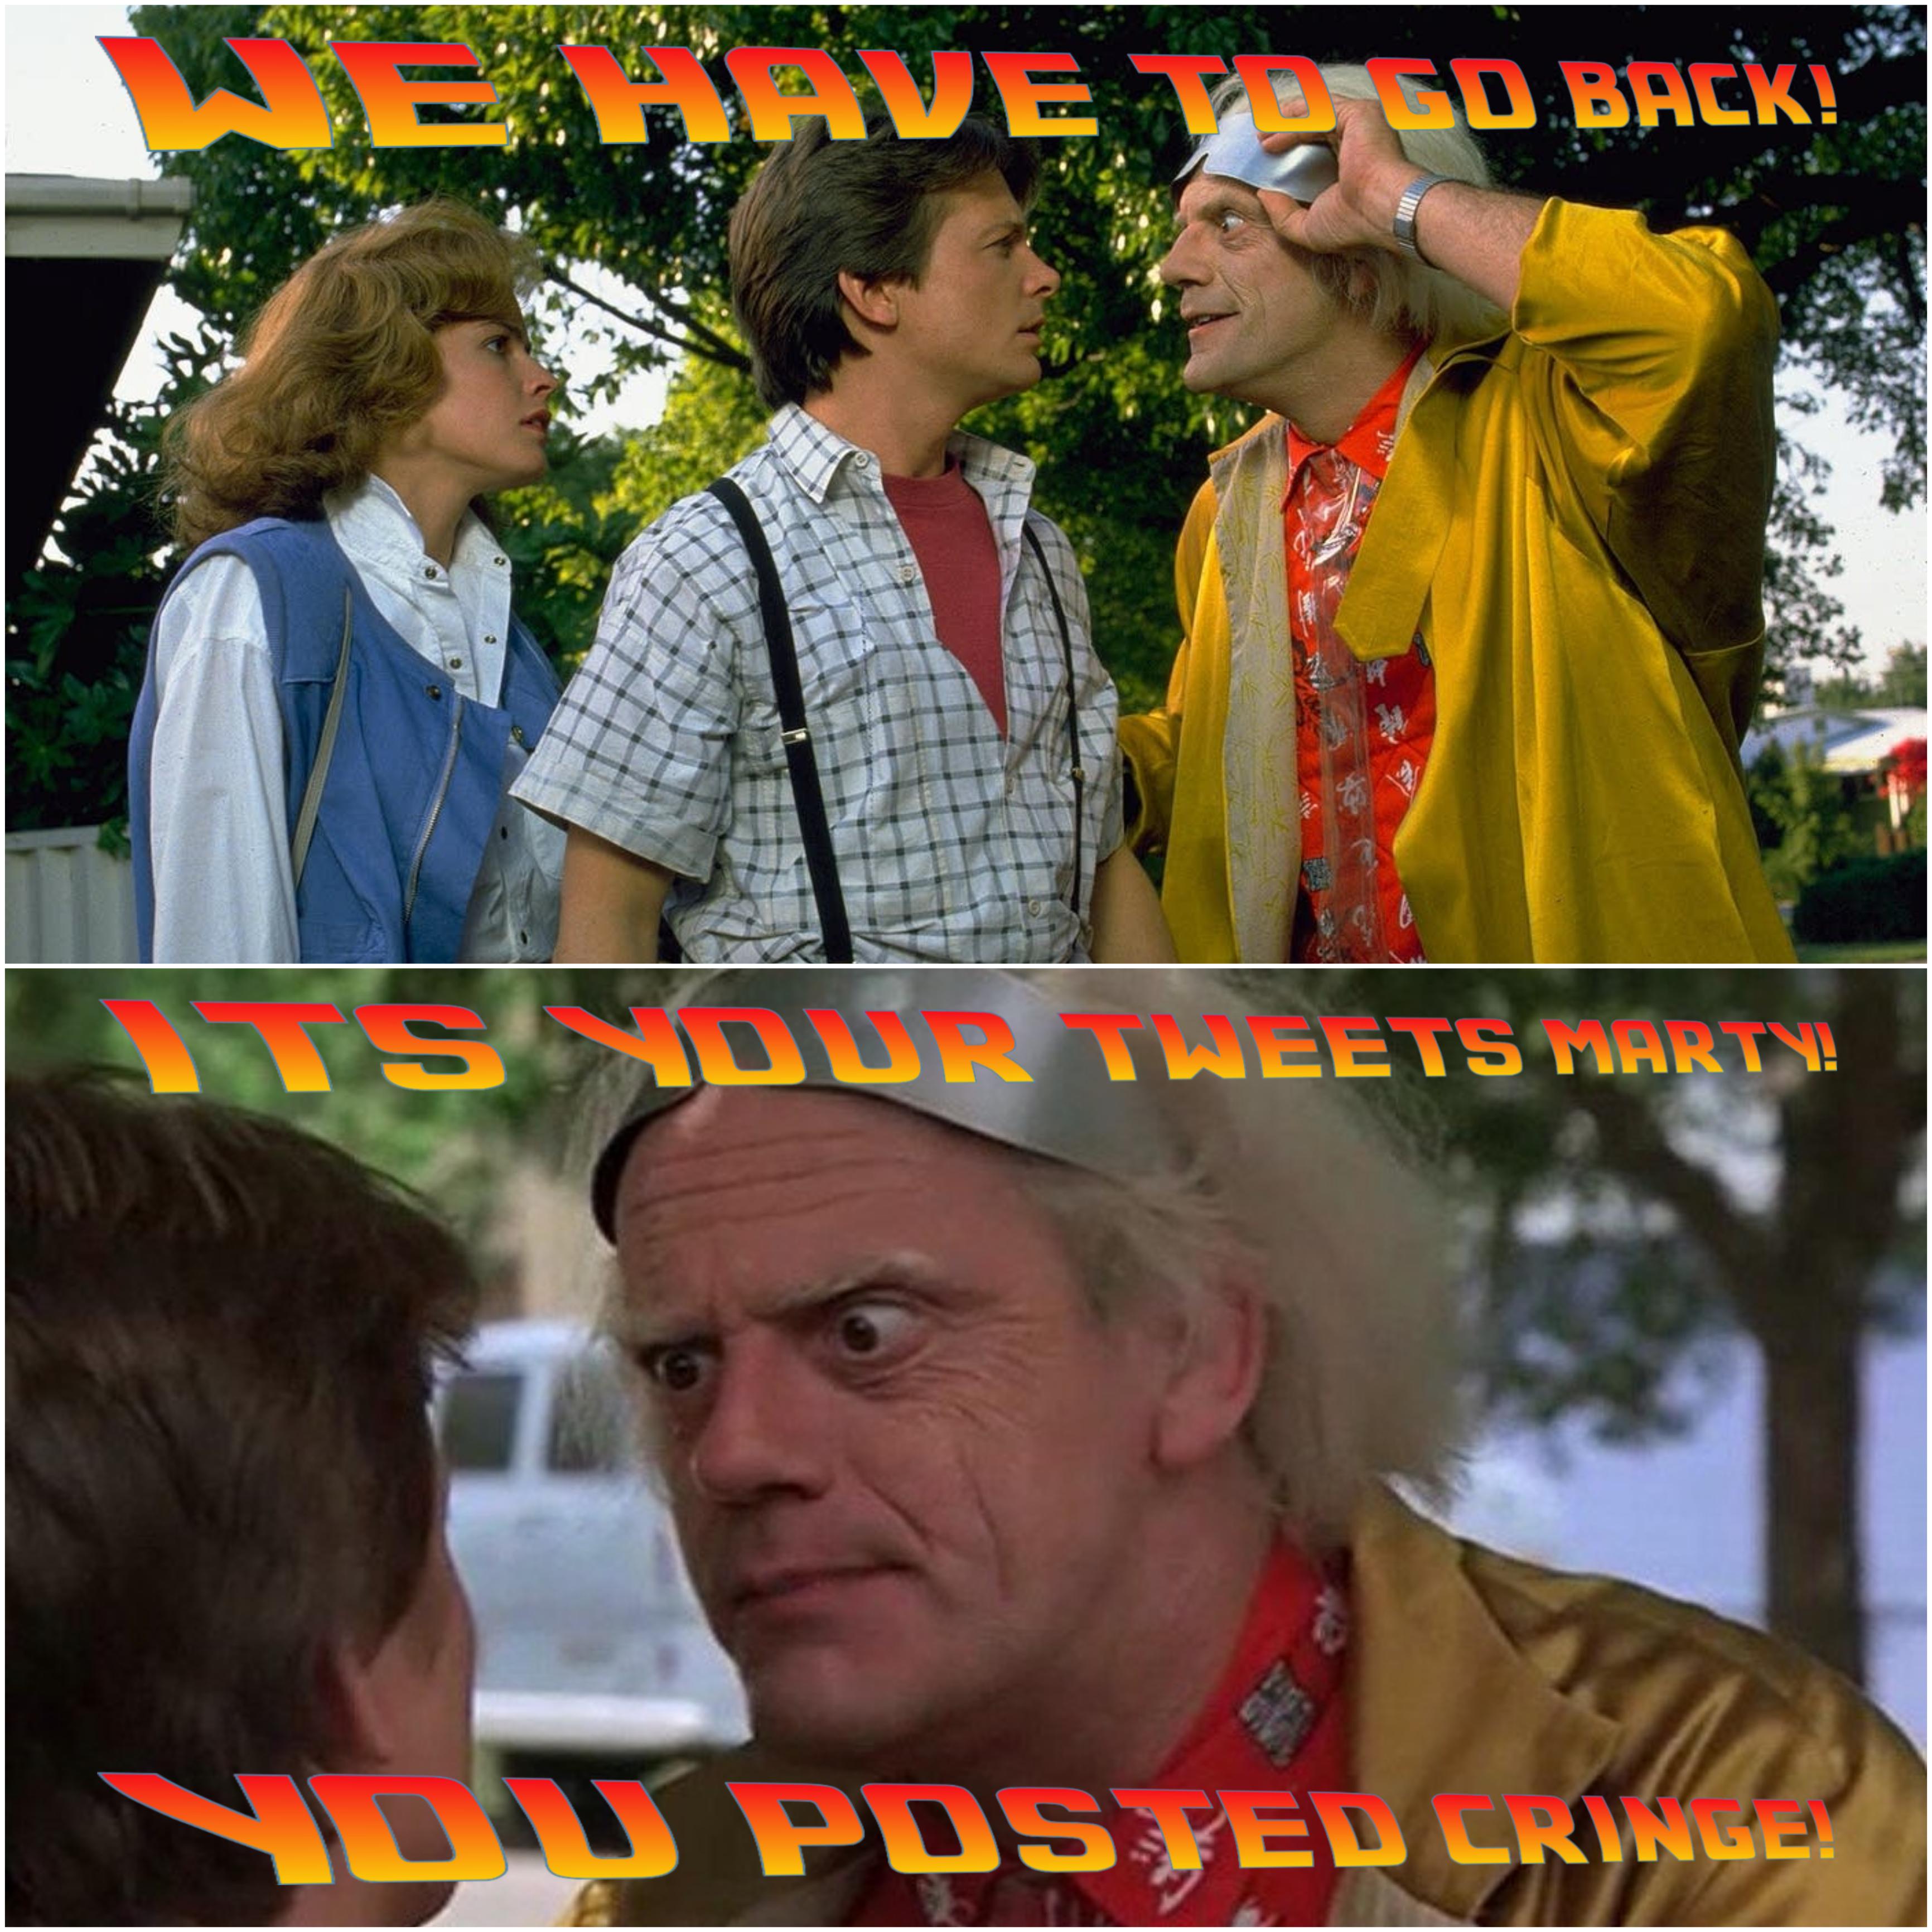 funny pics and memes - back to the future part ii